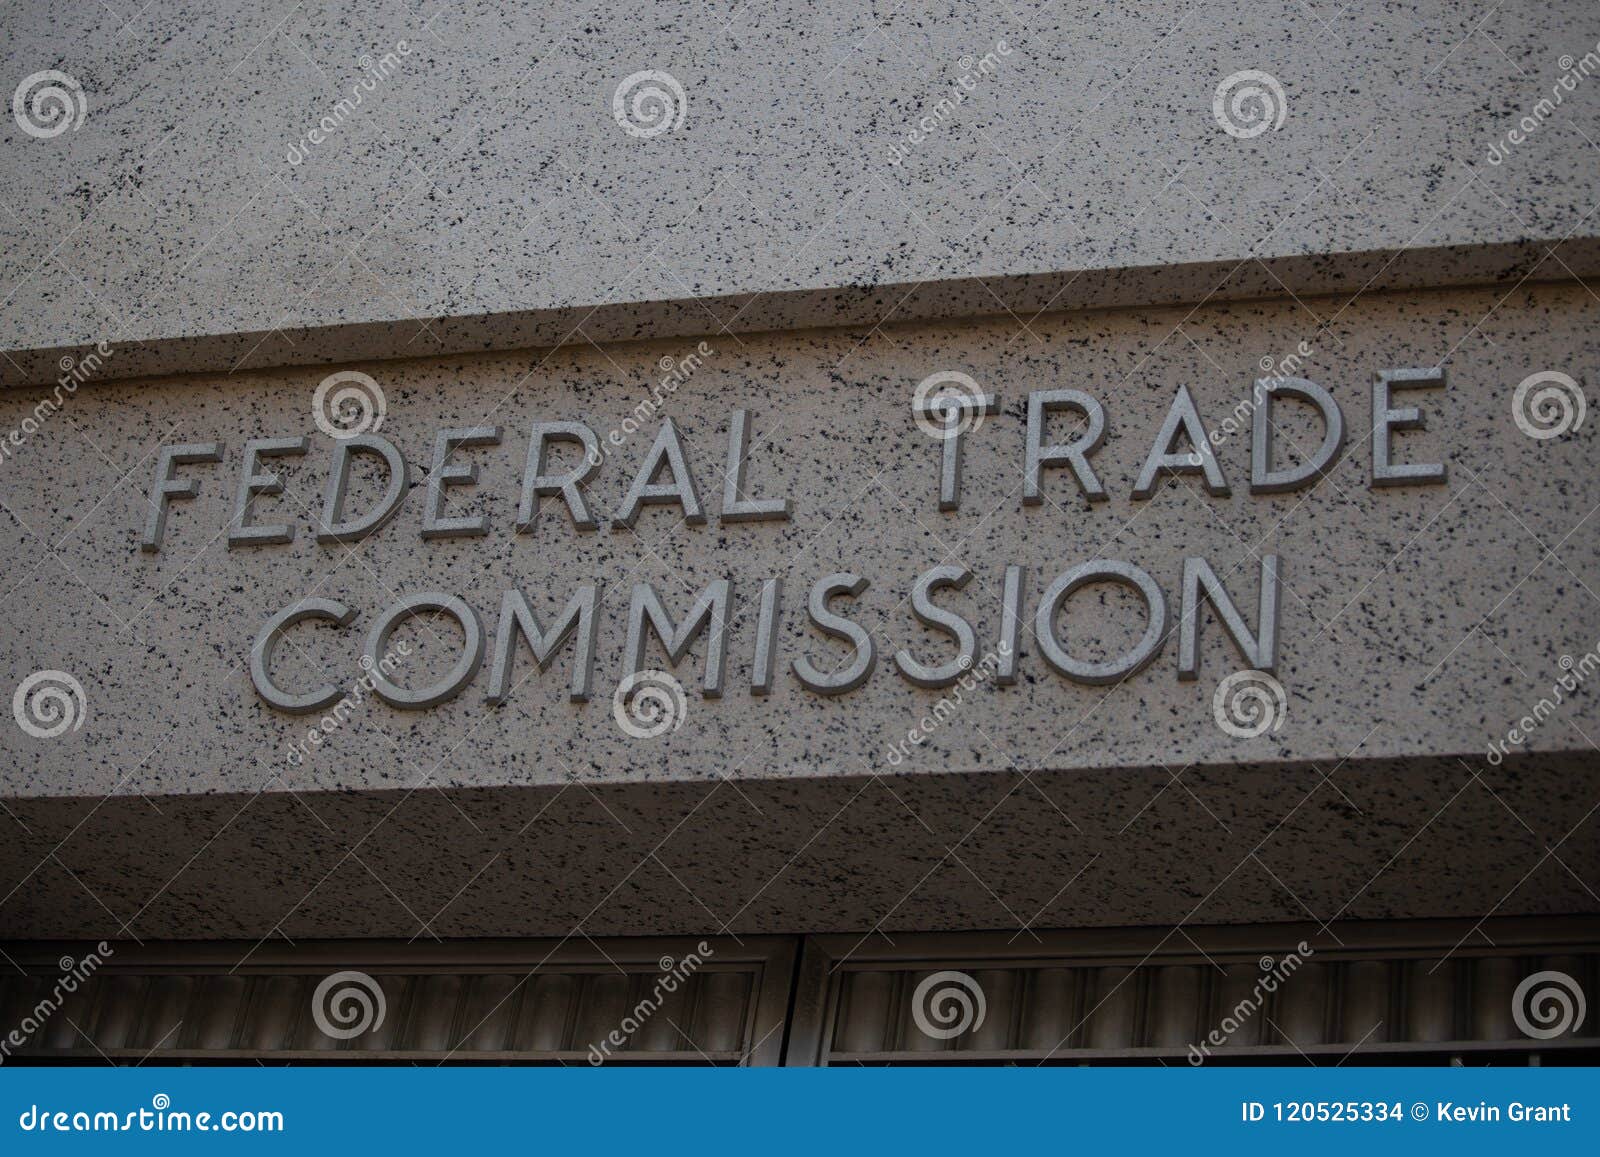 federal trade commission building sign detail